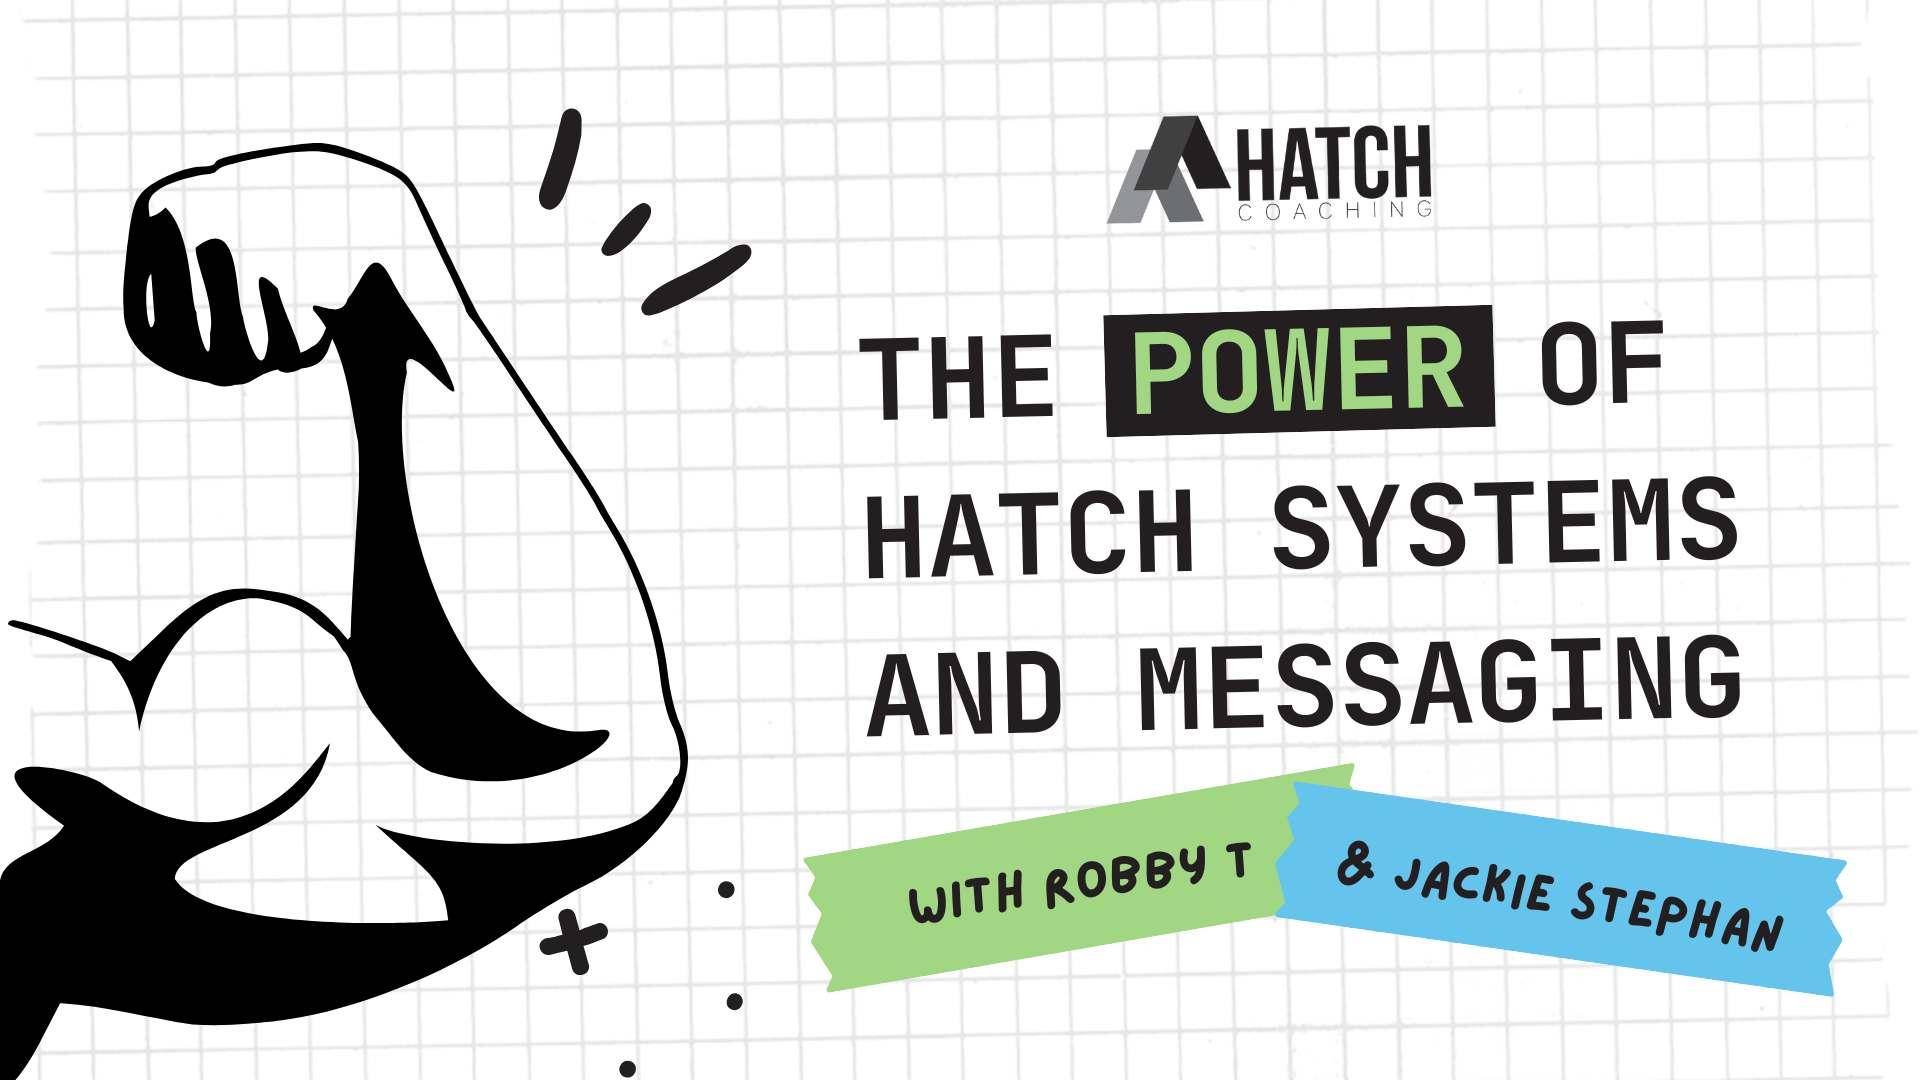 The Power of Hatch Systems & Messaging